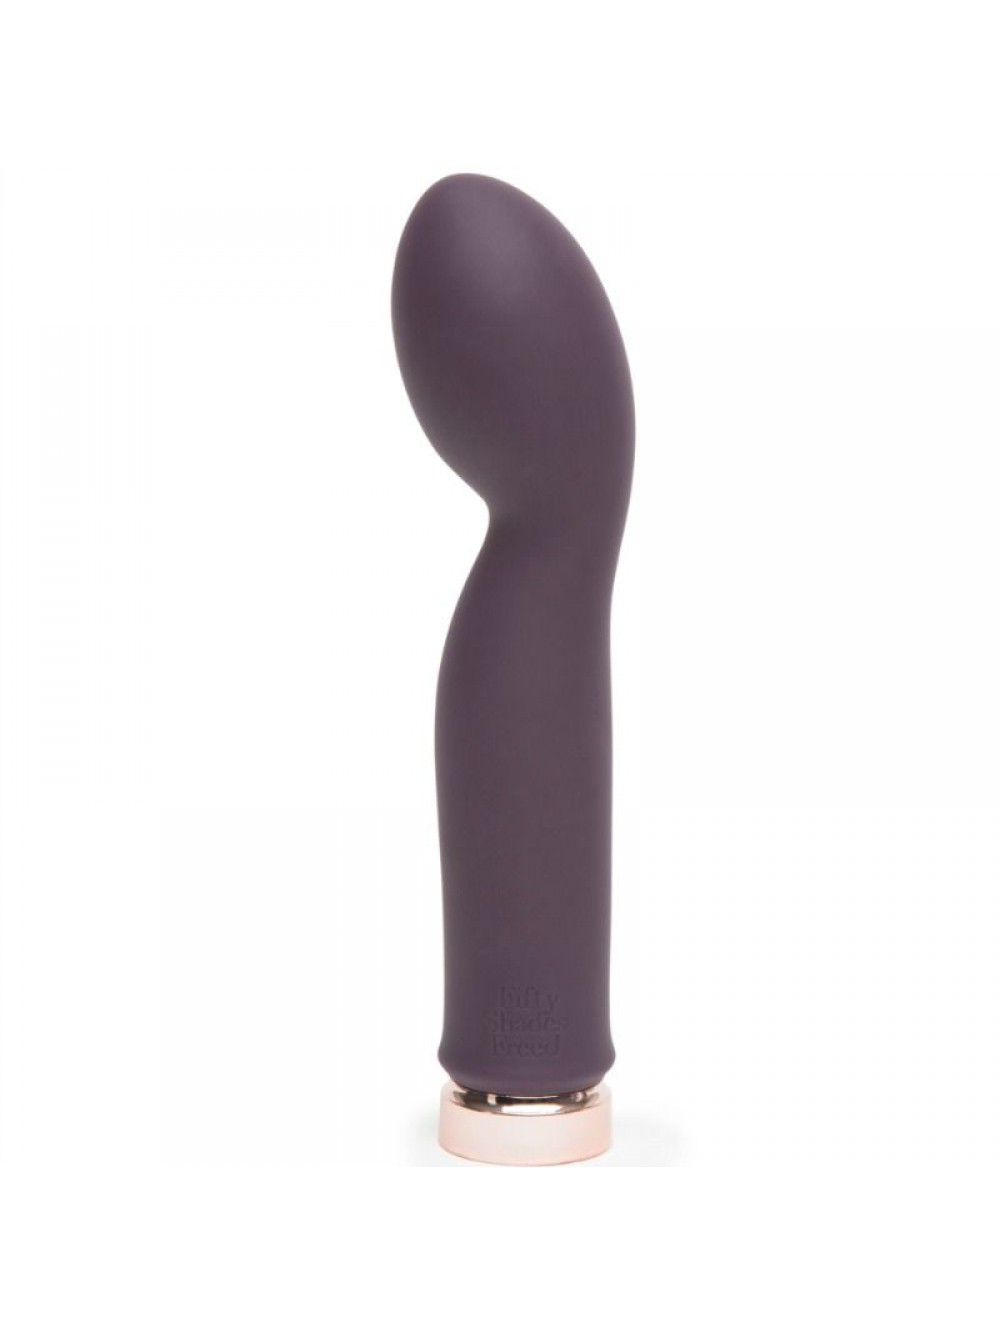 FIFTY SHADES FREED G-SPOT VIBRATOR - SO EXQUISITE 5060493003358